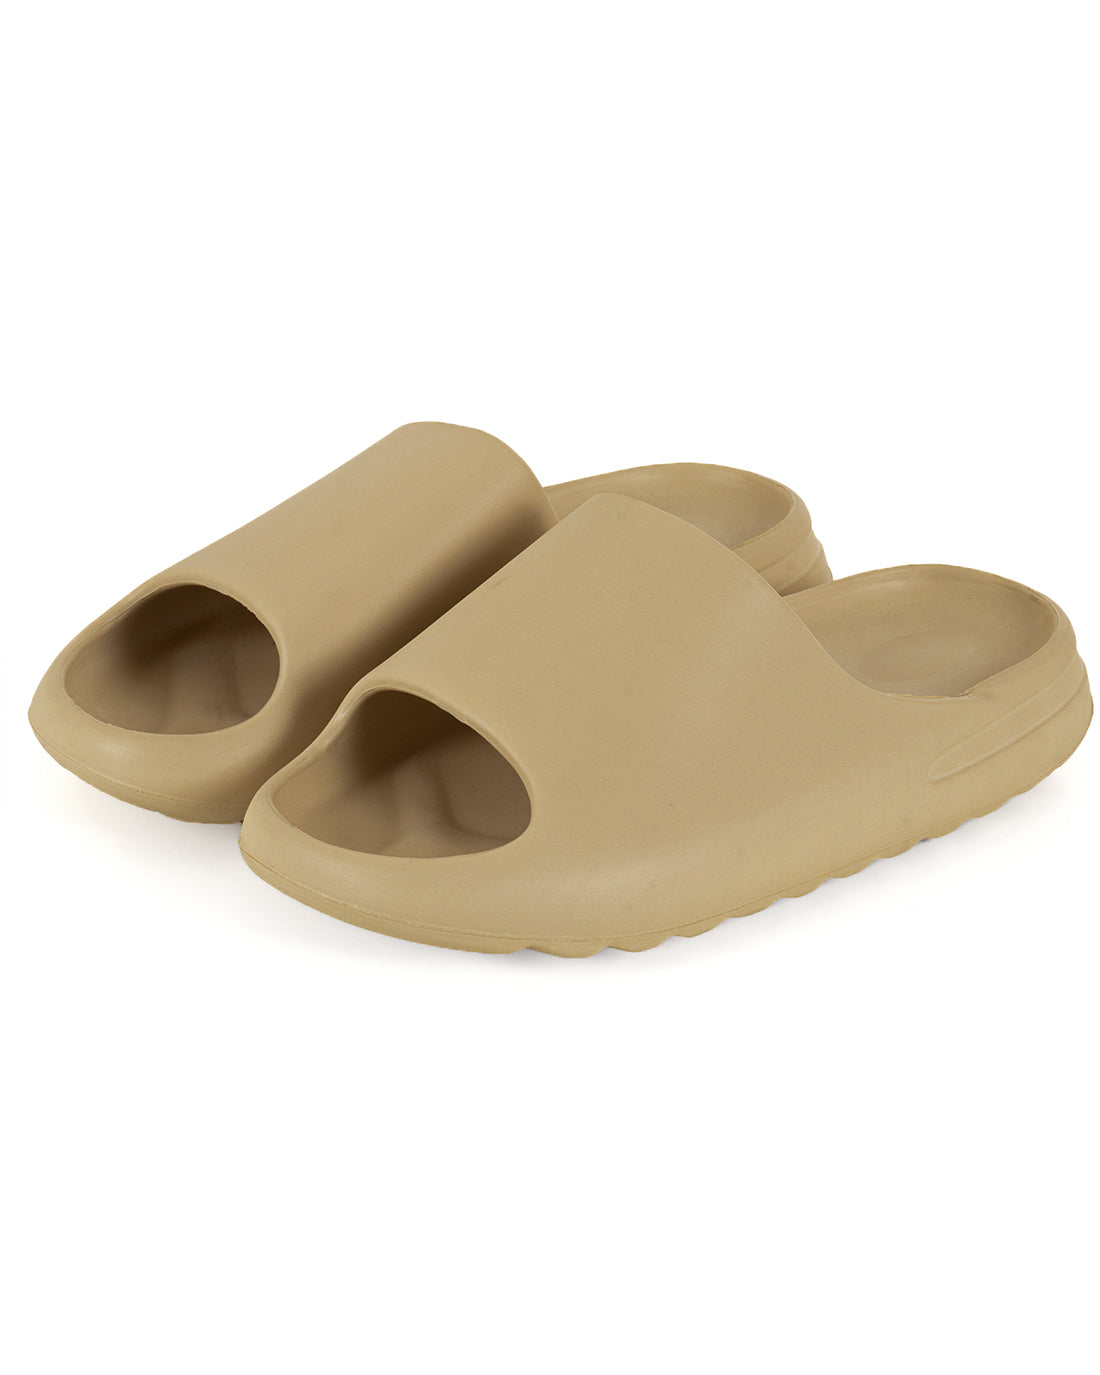 Unisex Men's Summer Rubber Slippers Sea Pool Solid Color Beige Non-slip Slippers GIOSAL-S1224A